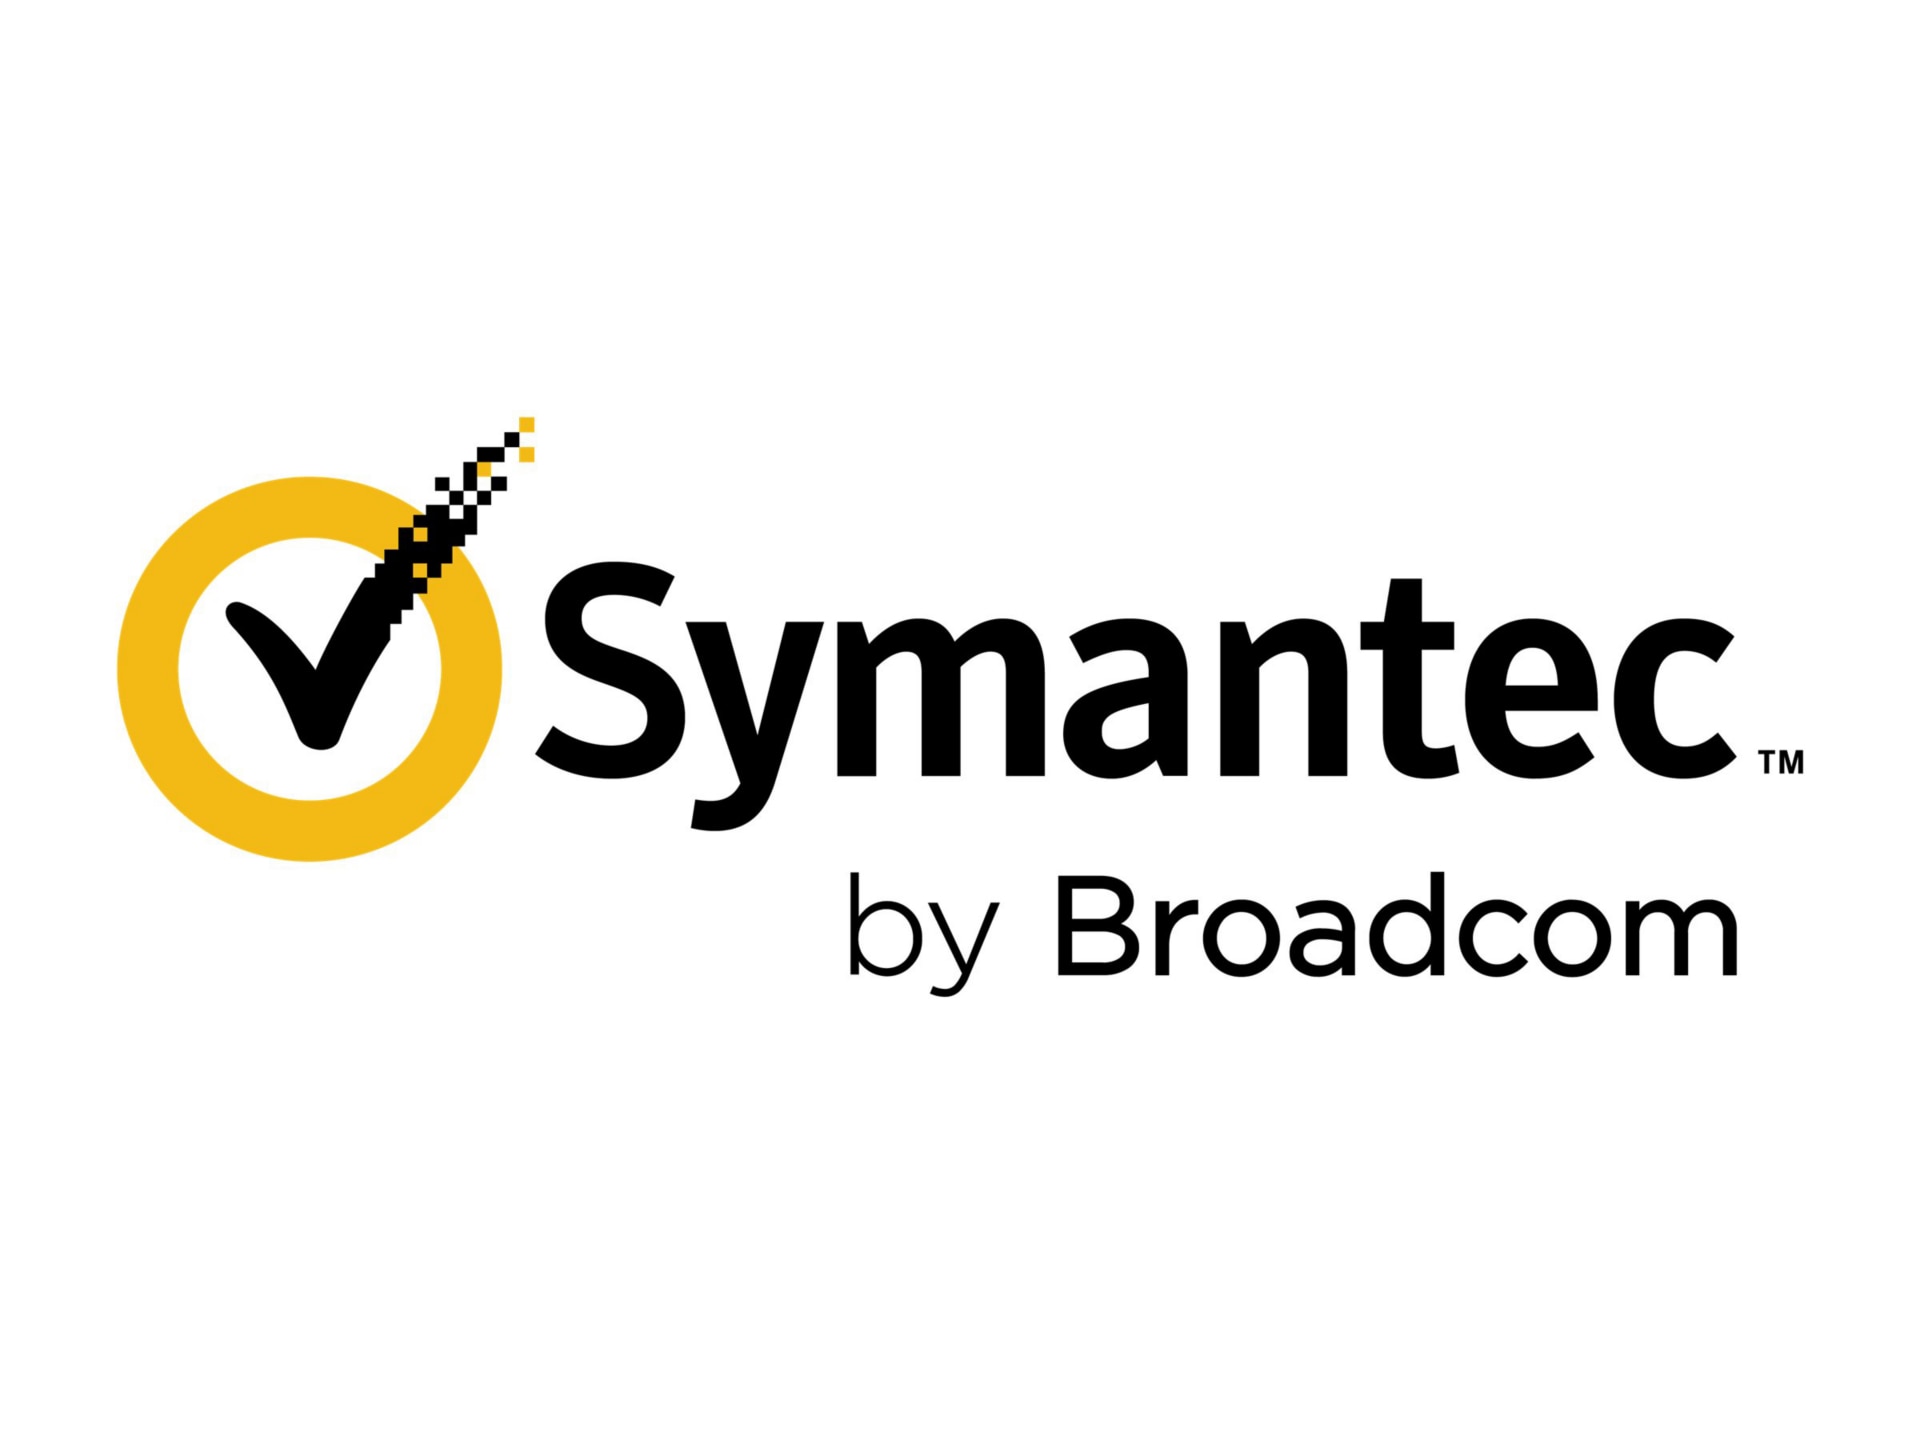 Symantec Validation and ID Protection Service Feitian Authenticator, VC-100E, OTP Event Based Card - security smart card